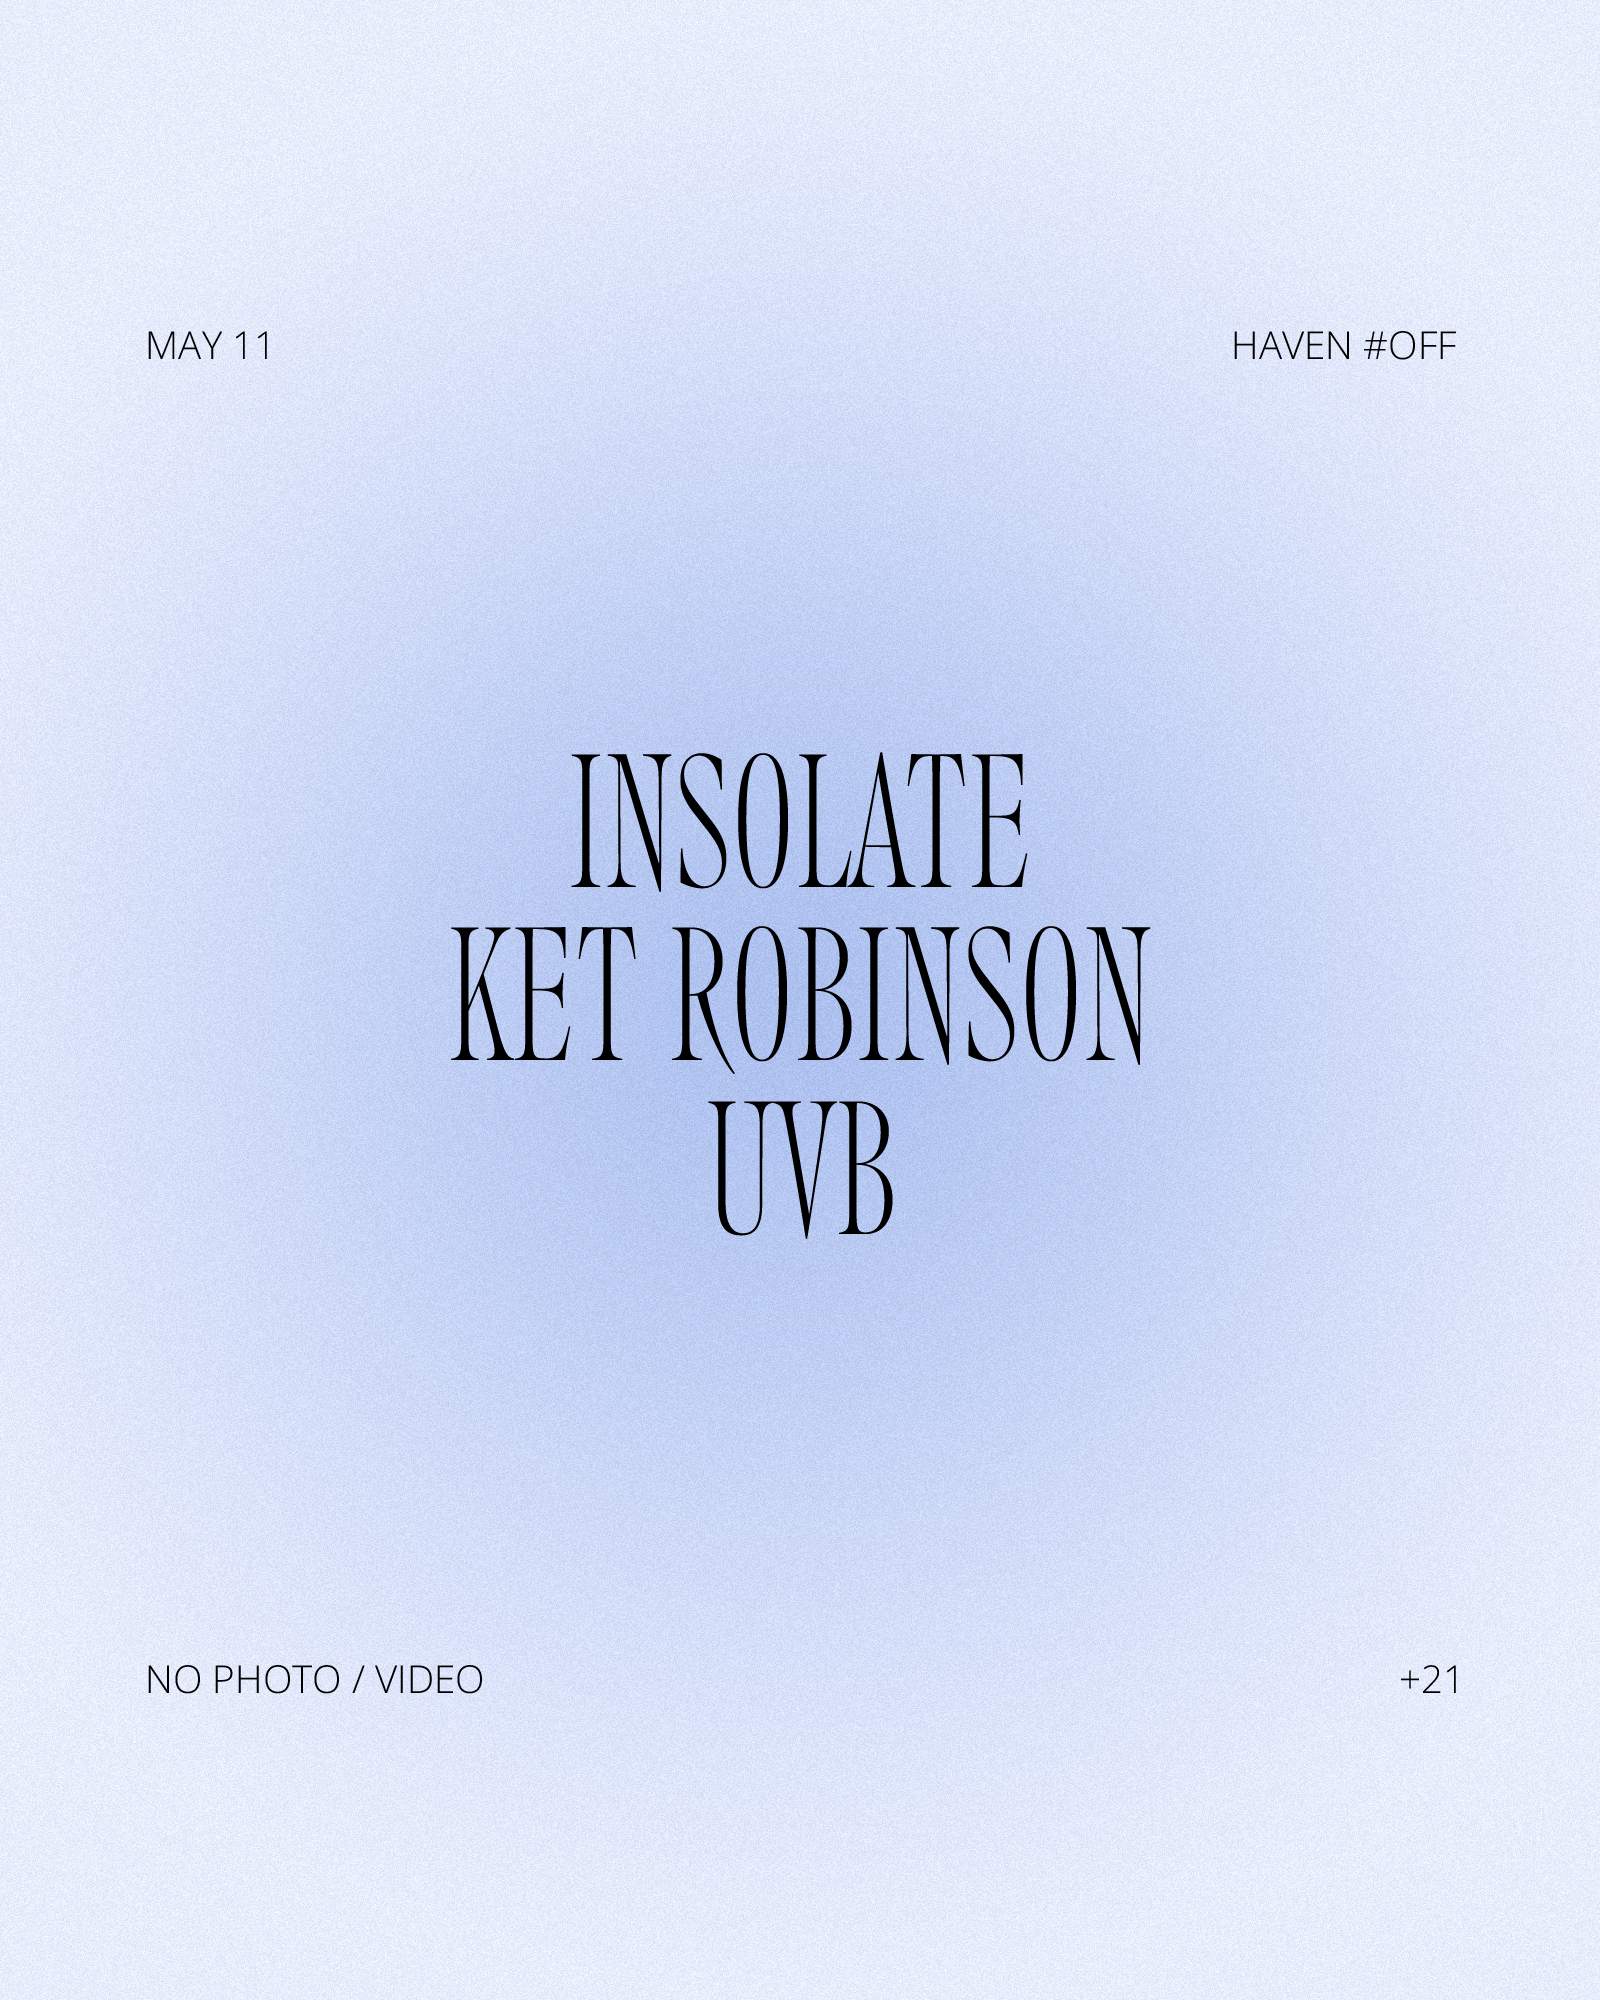 HAVEN #OFF • UVB, Insolate, Ket Robinson - フライヤー裏